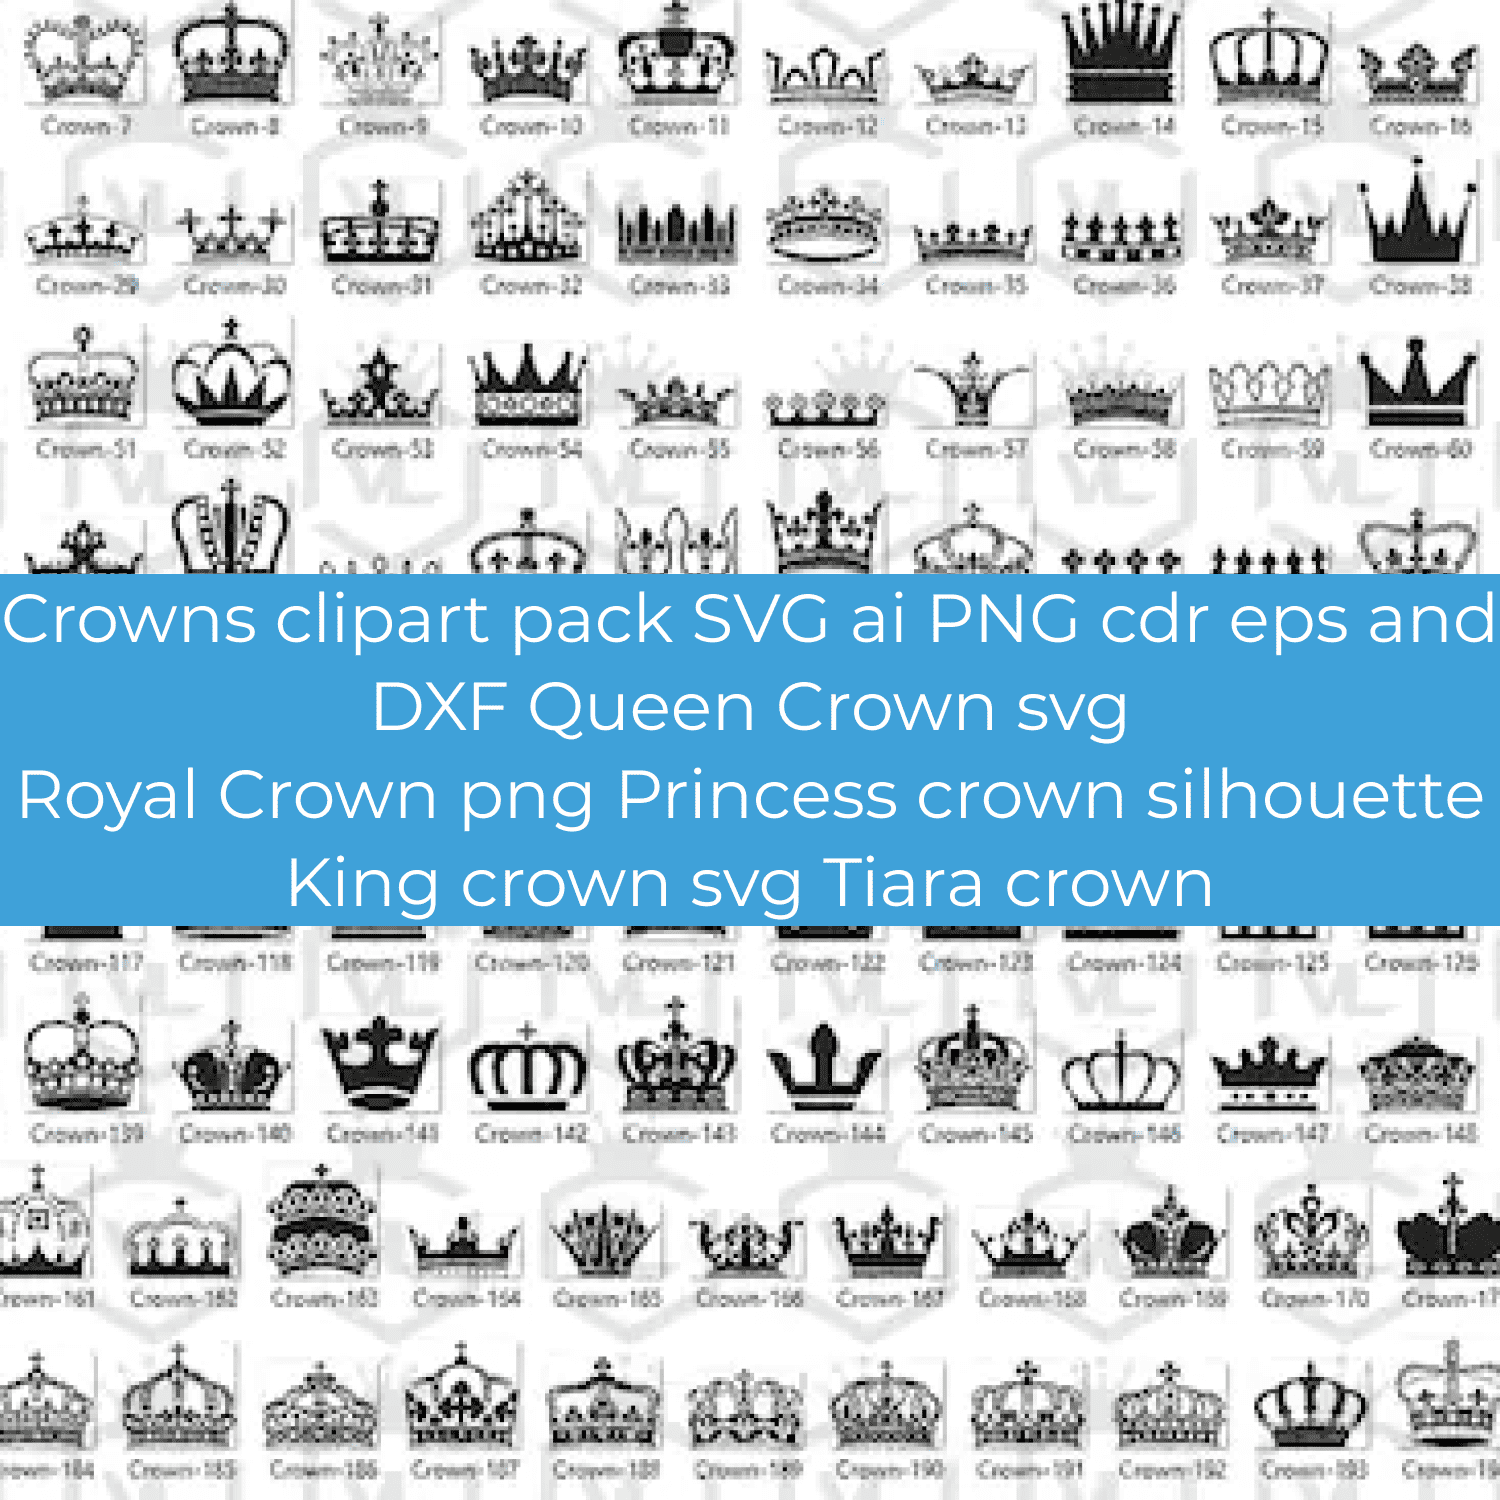 Crowns clipart pack SVG.